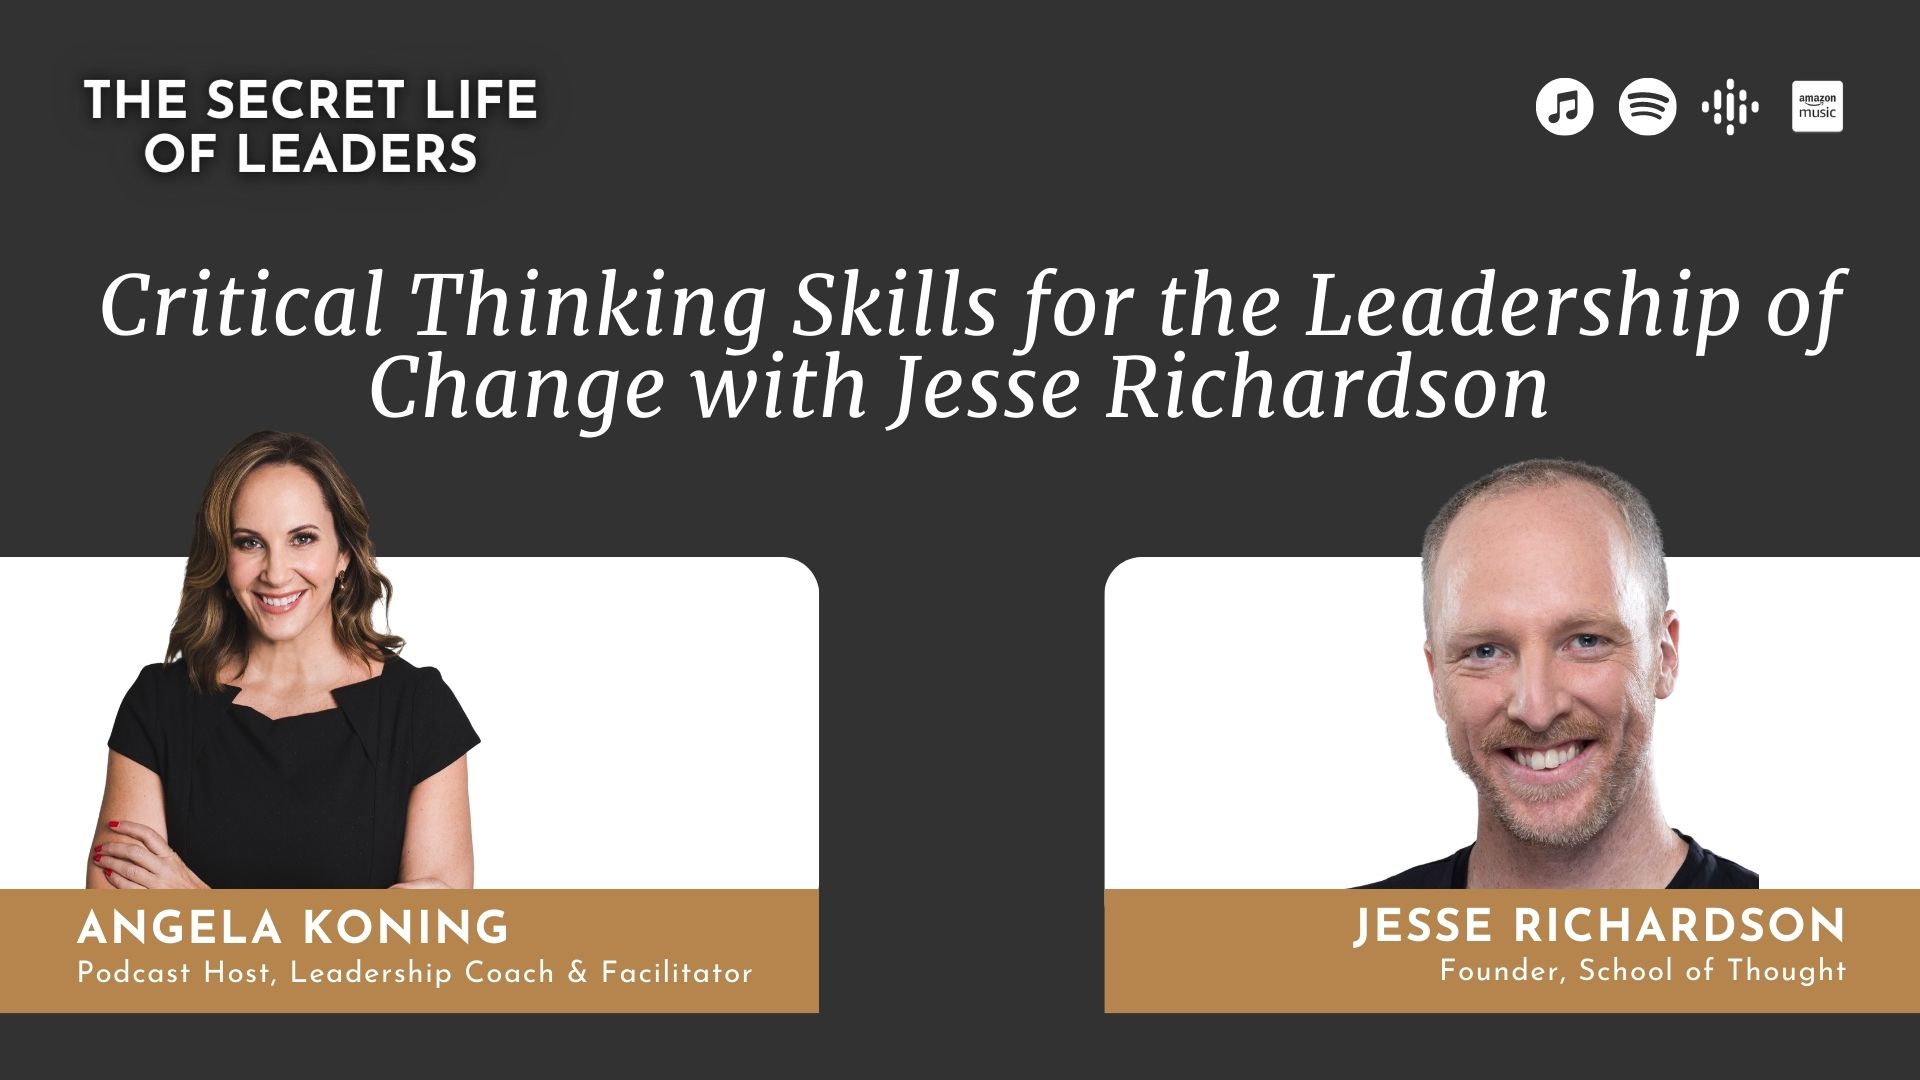 Critical Thinking Skills for the Leadership of Change with Jesse Richardson